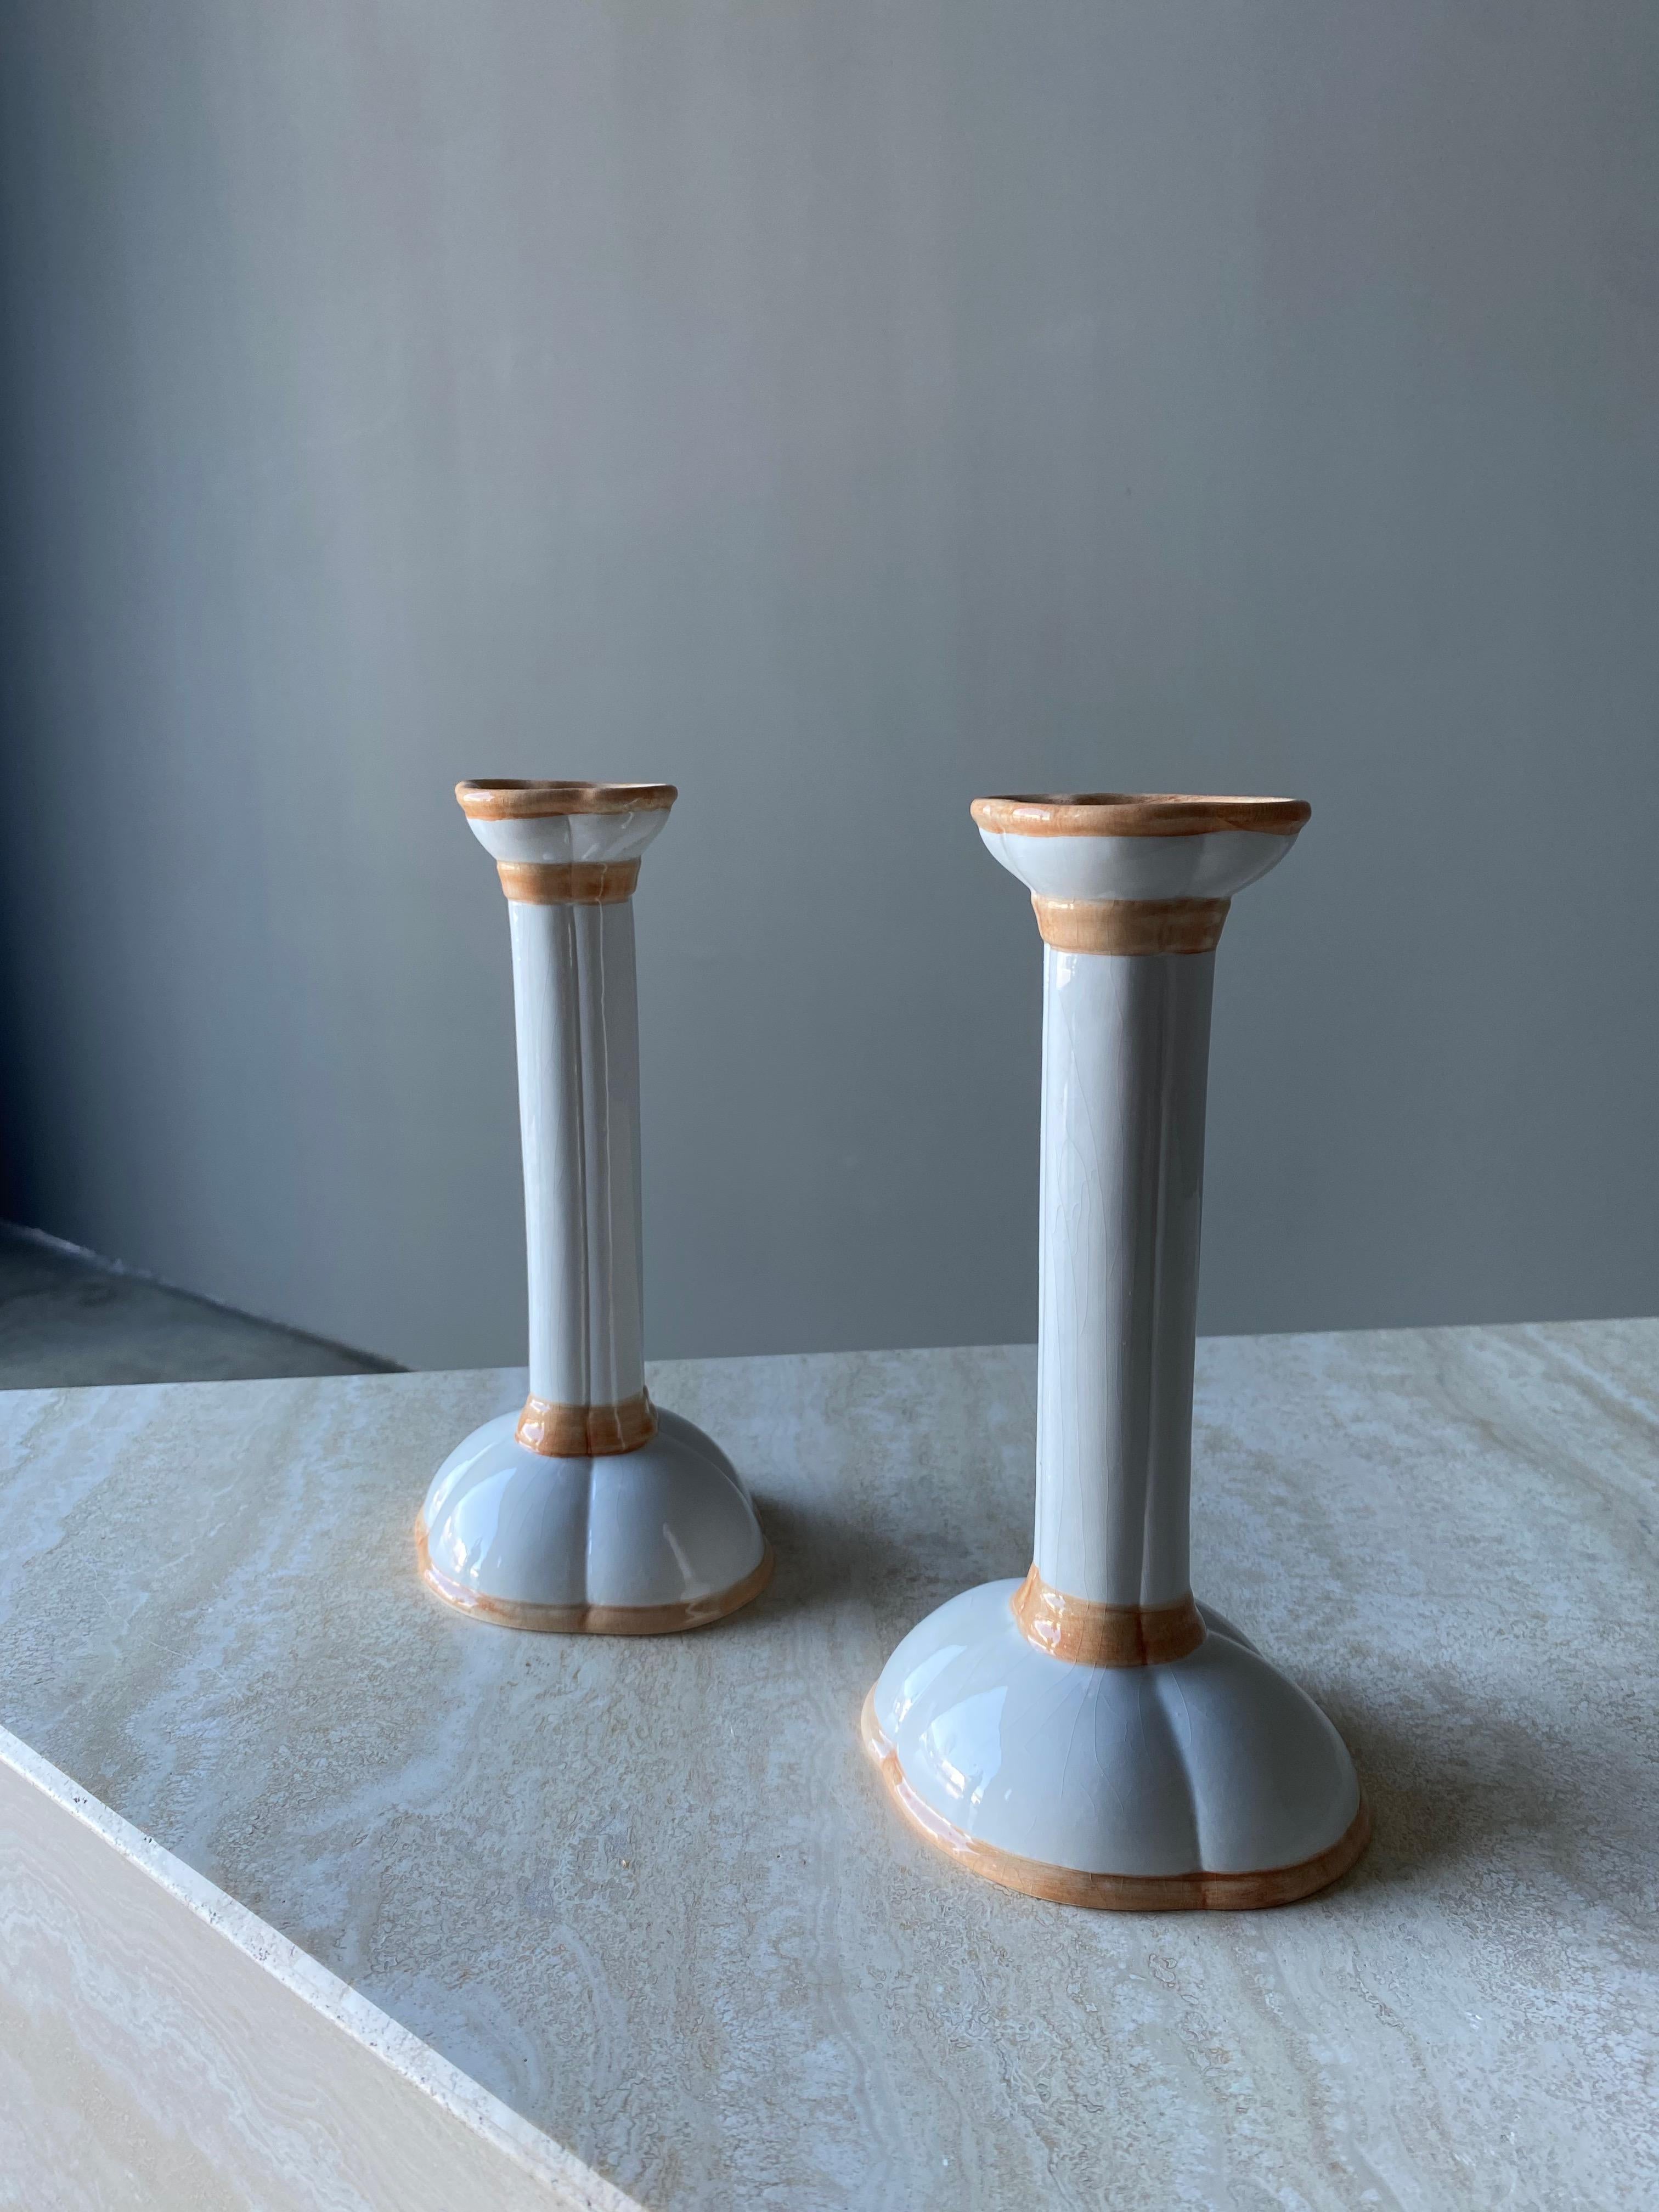 Italian Hand Painted Ceramic Candlesticks, 1960s For Sale 1